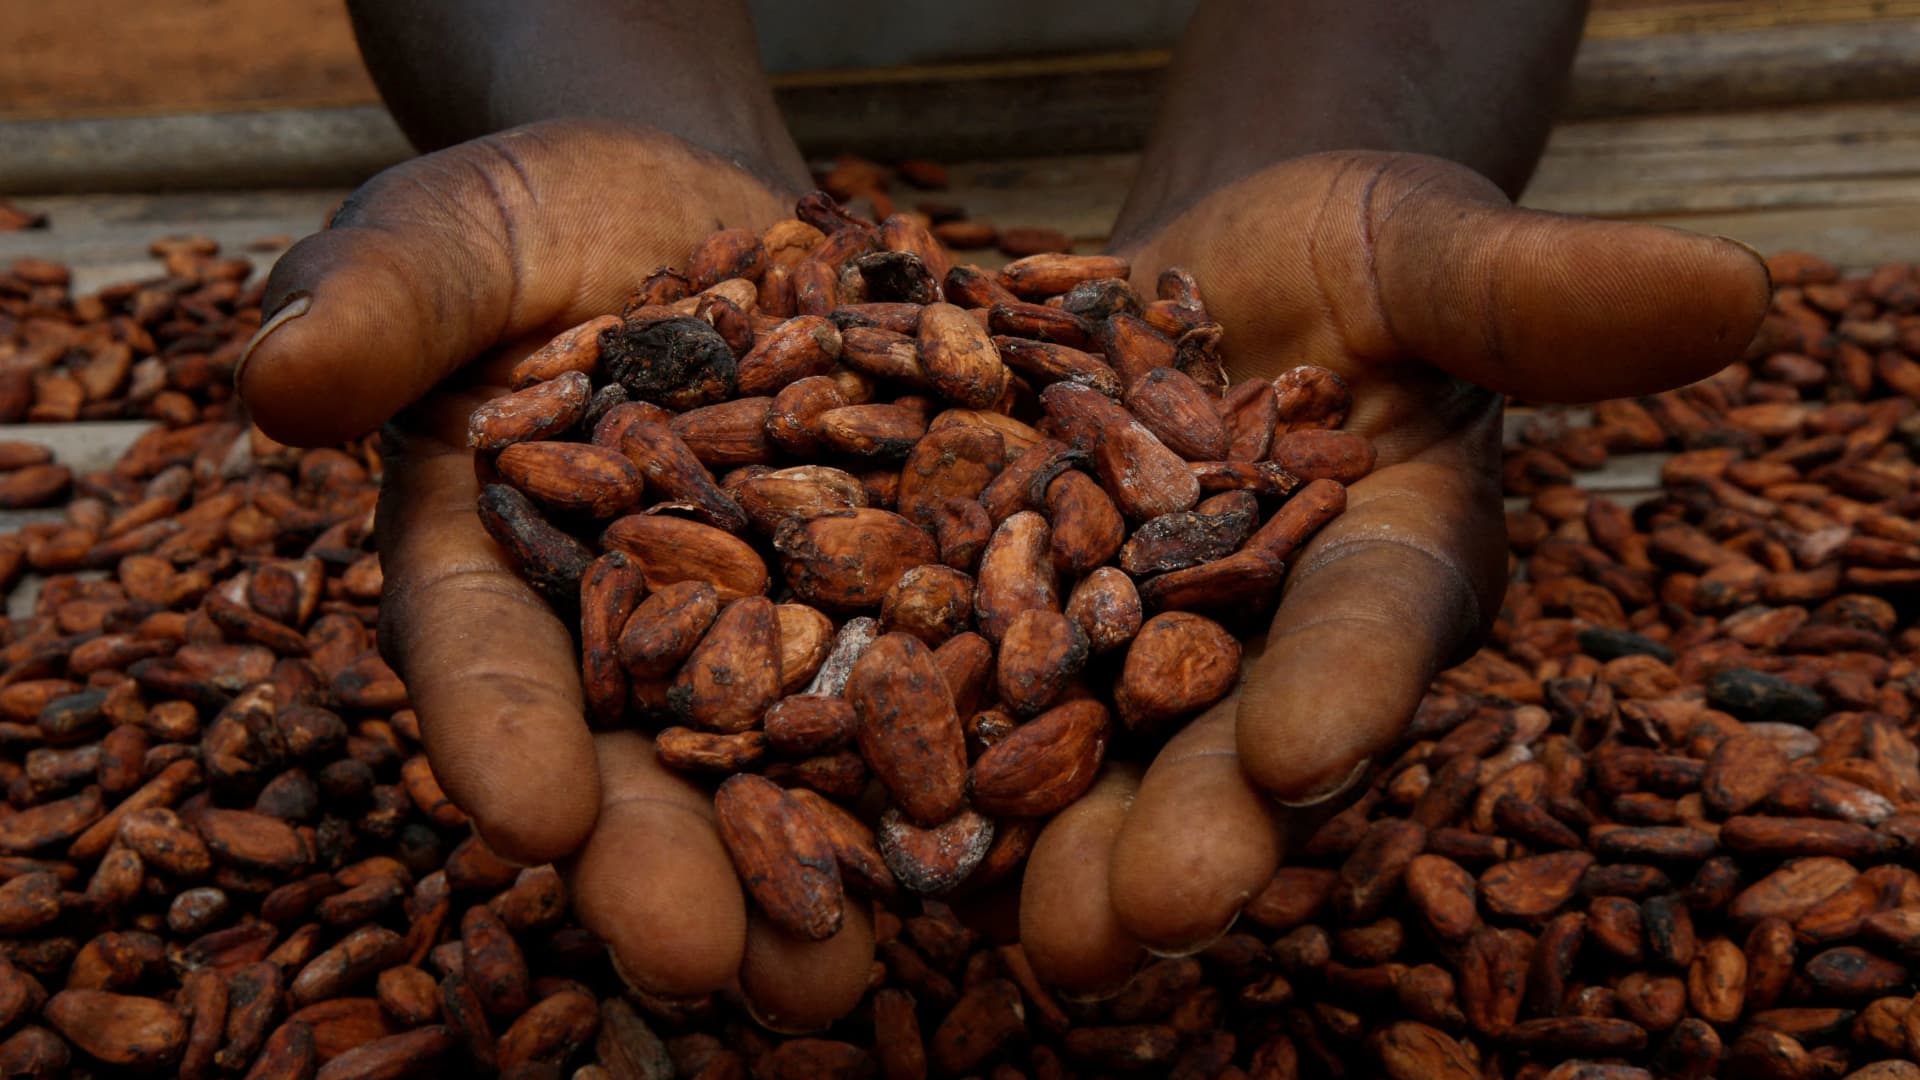 Cocoa prices are soaring to record levels. What it means for consumers and why ‘the worst is still yet to come’